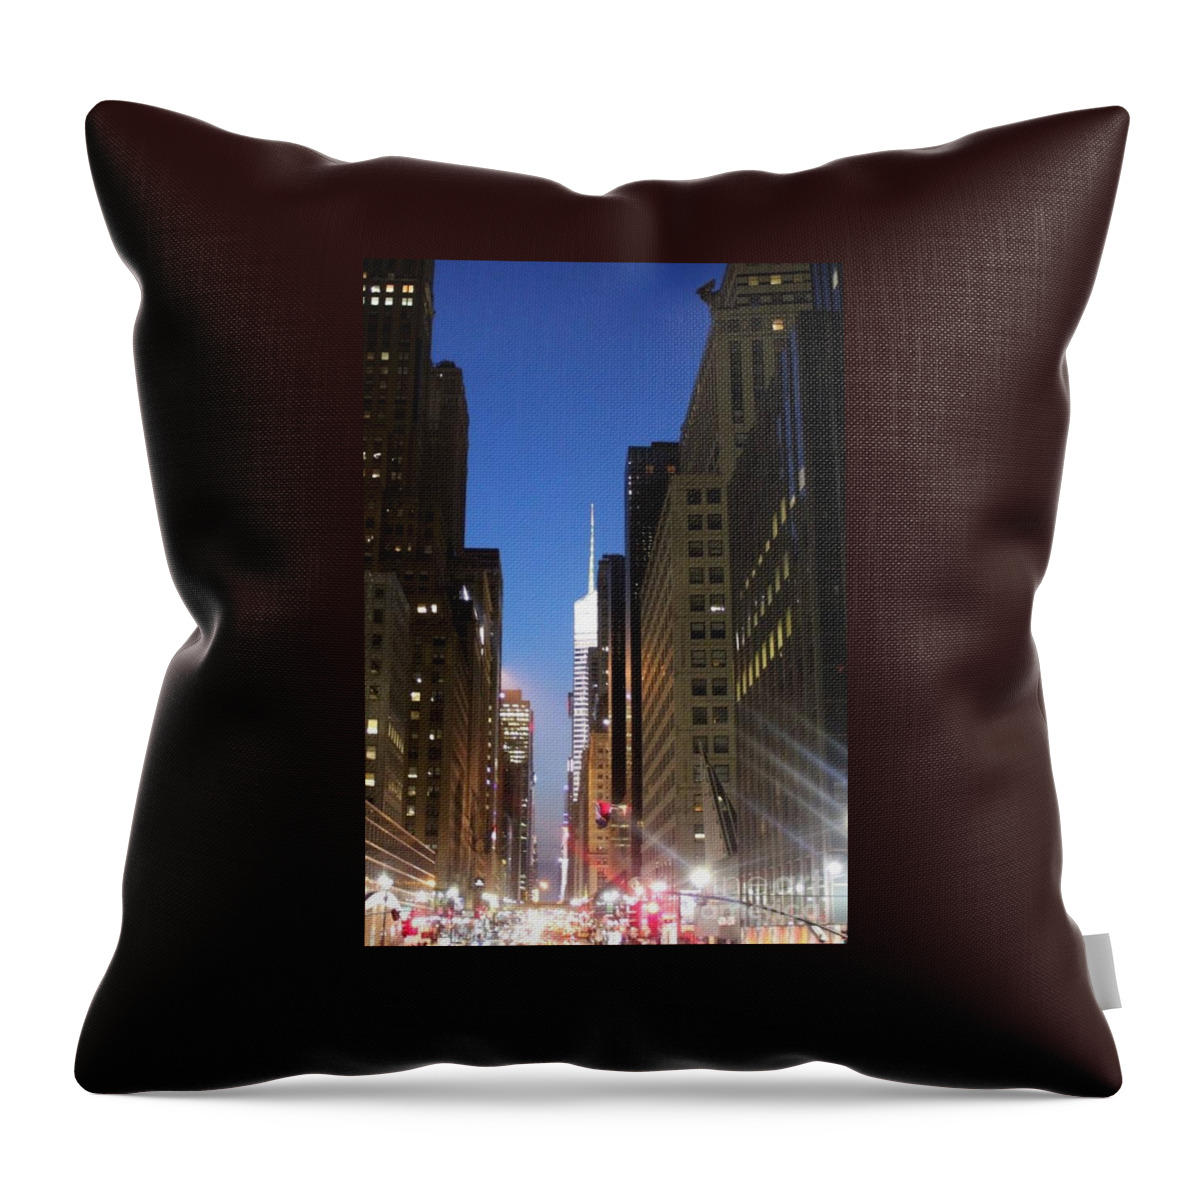 Night Lights Throw Pillow featuring the photograph NYC lights by Deena Withycombe